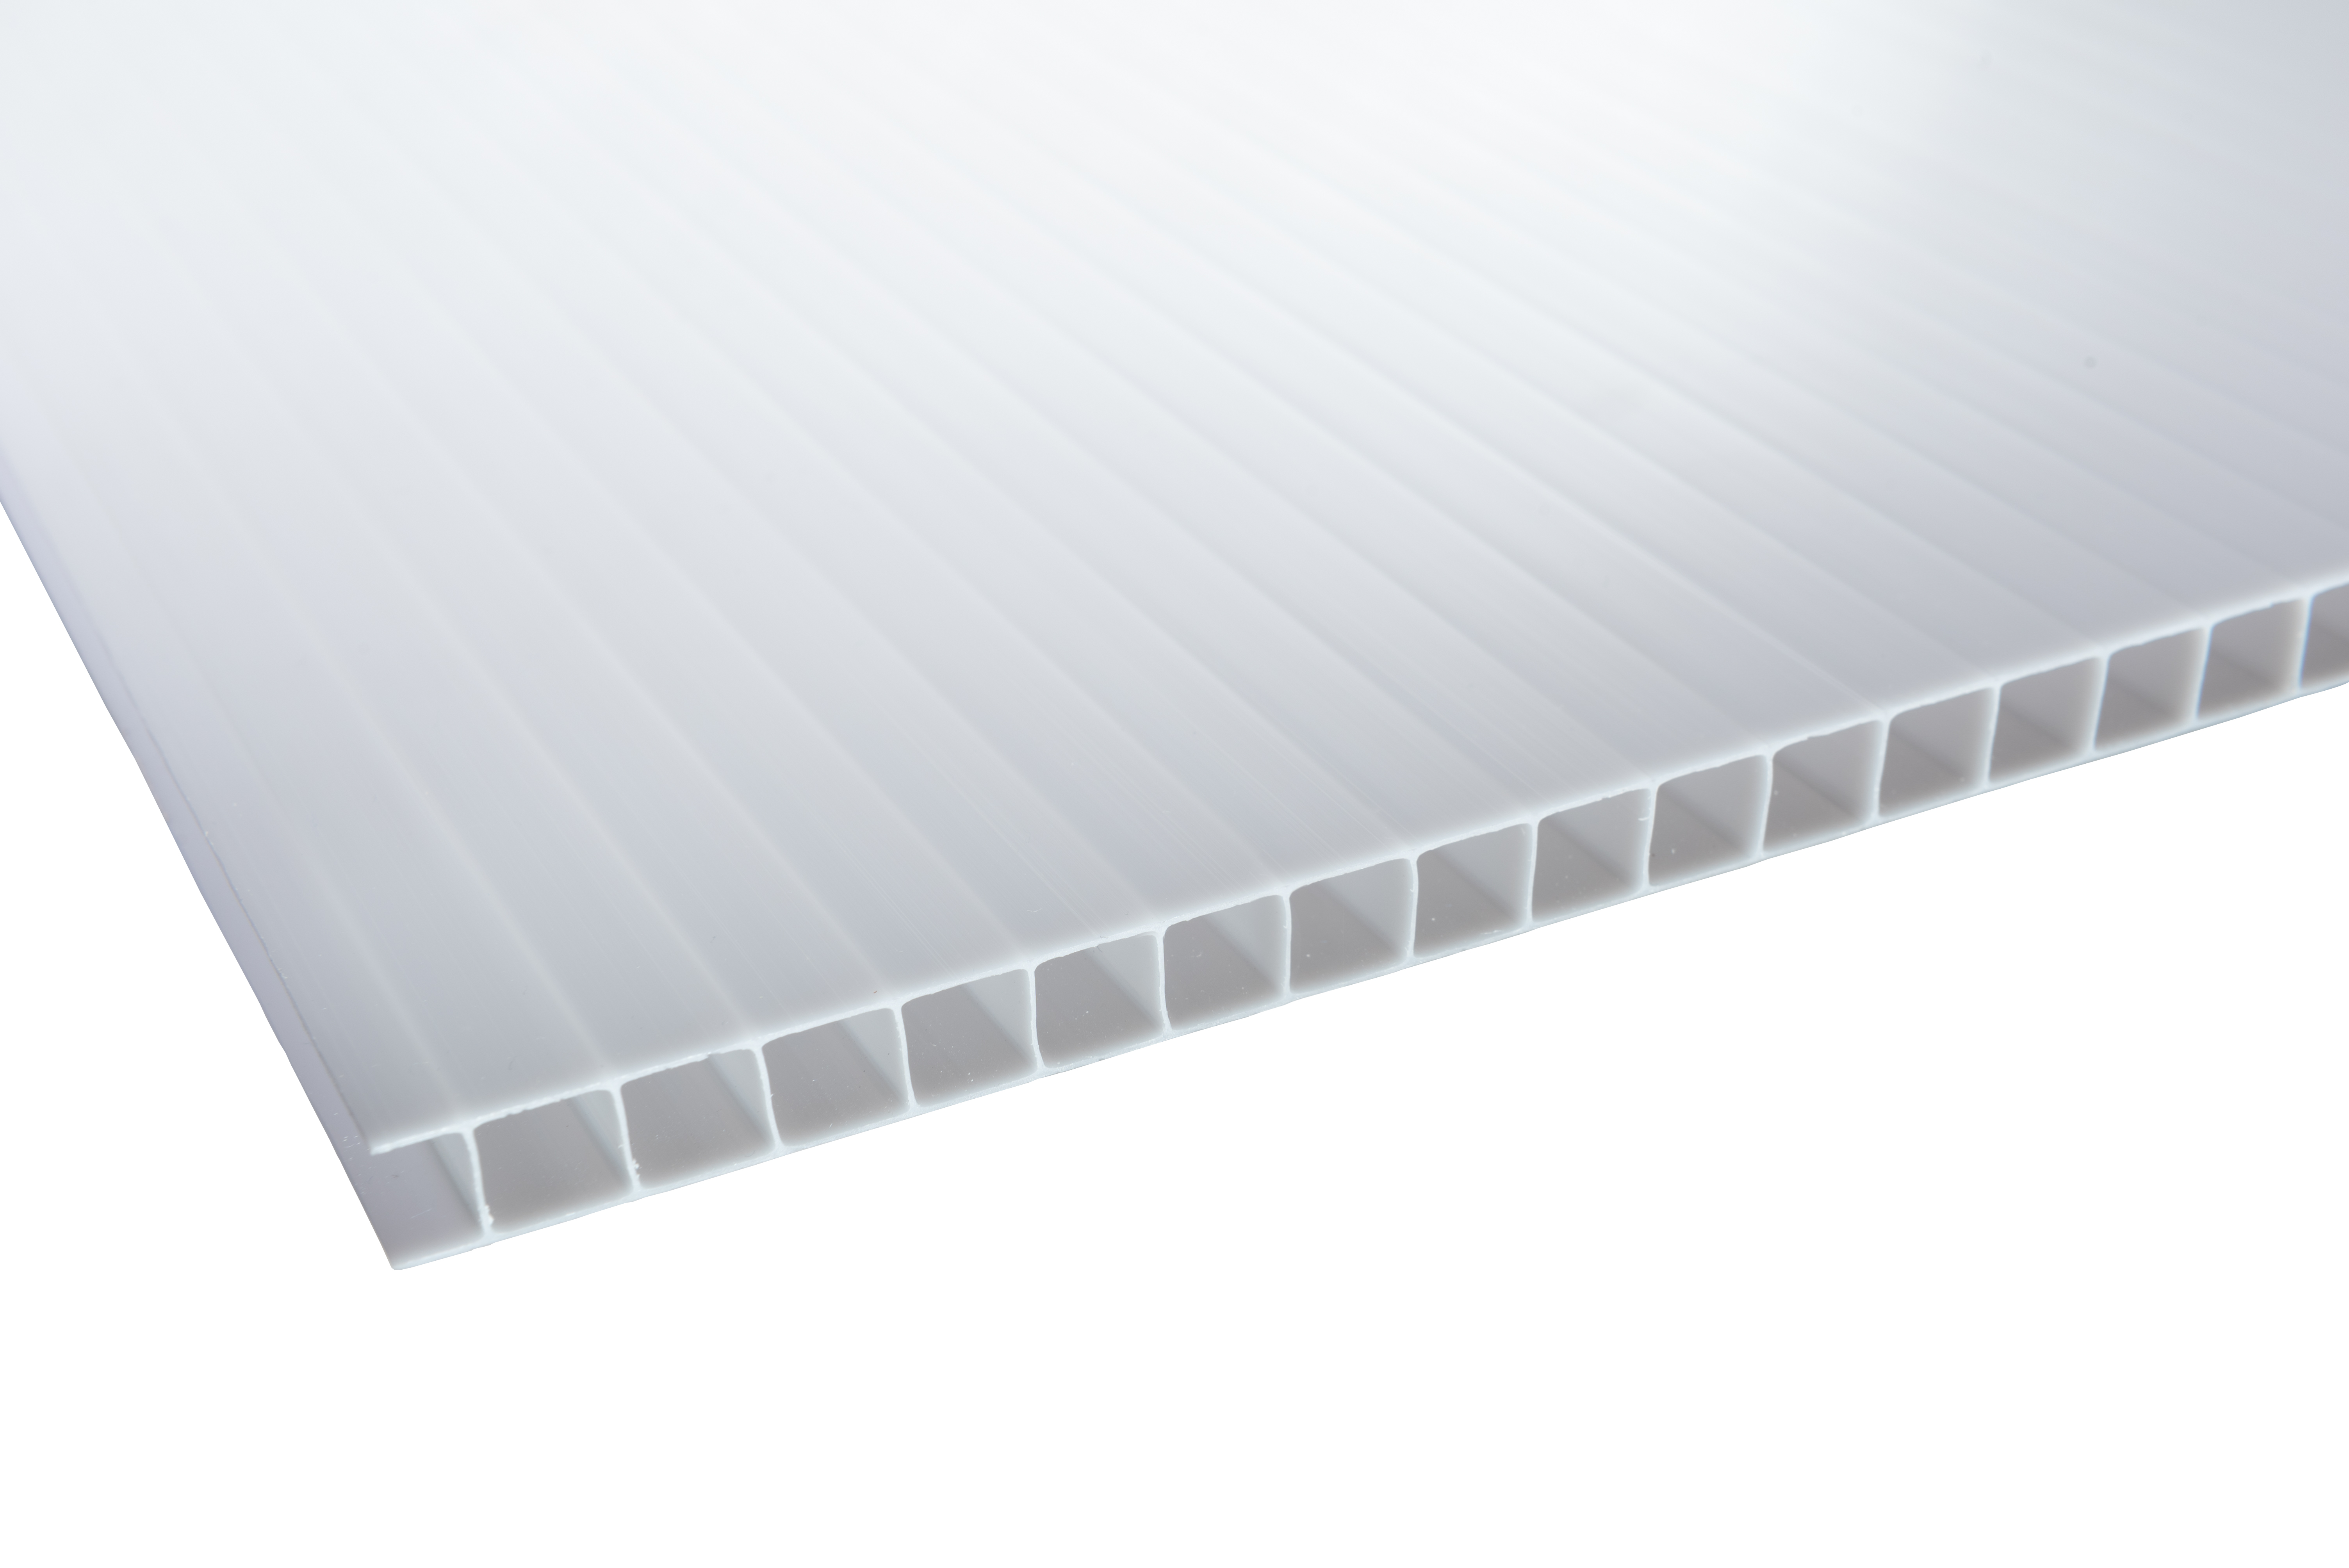 Image of 10mm Opal Multiwall Polycarbonate Sheet - 2500 x 700mm